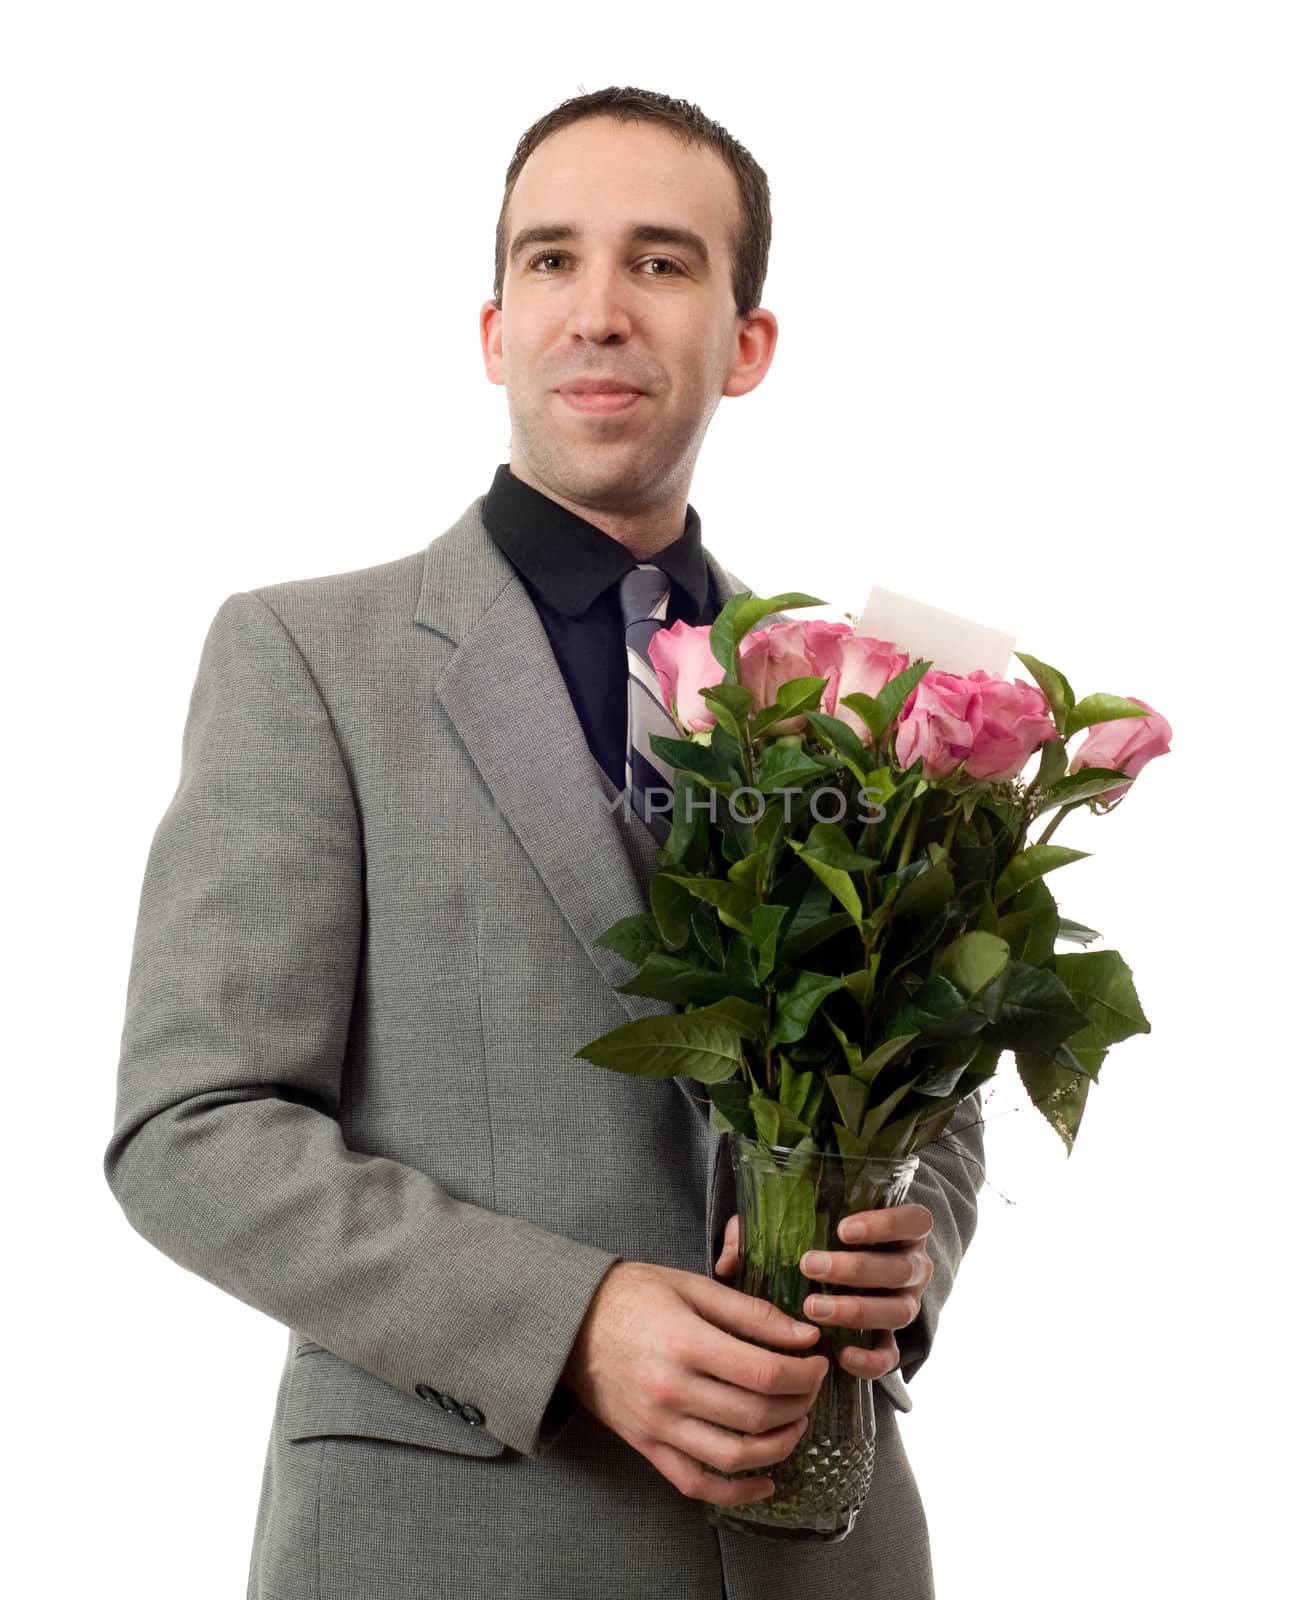 A young man holding a vase of roses, isolated against a white background